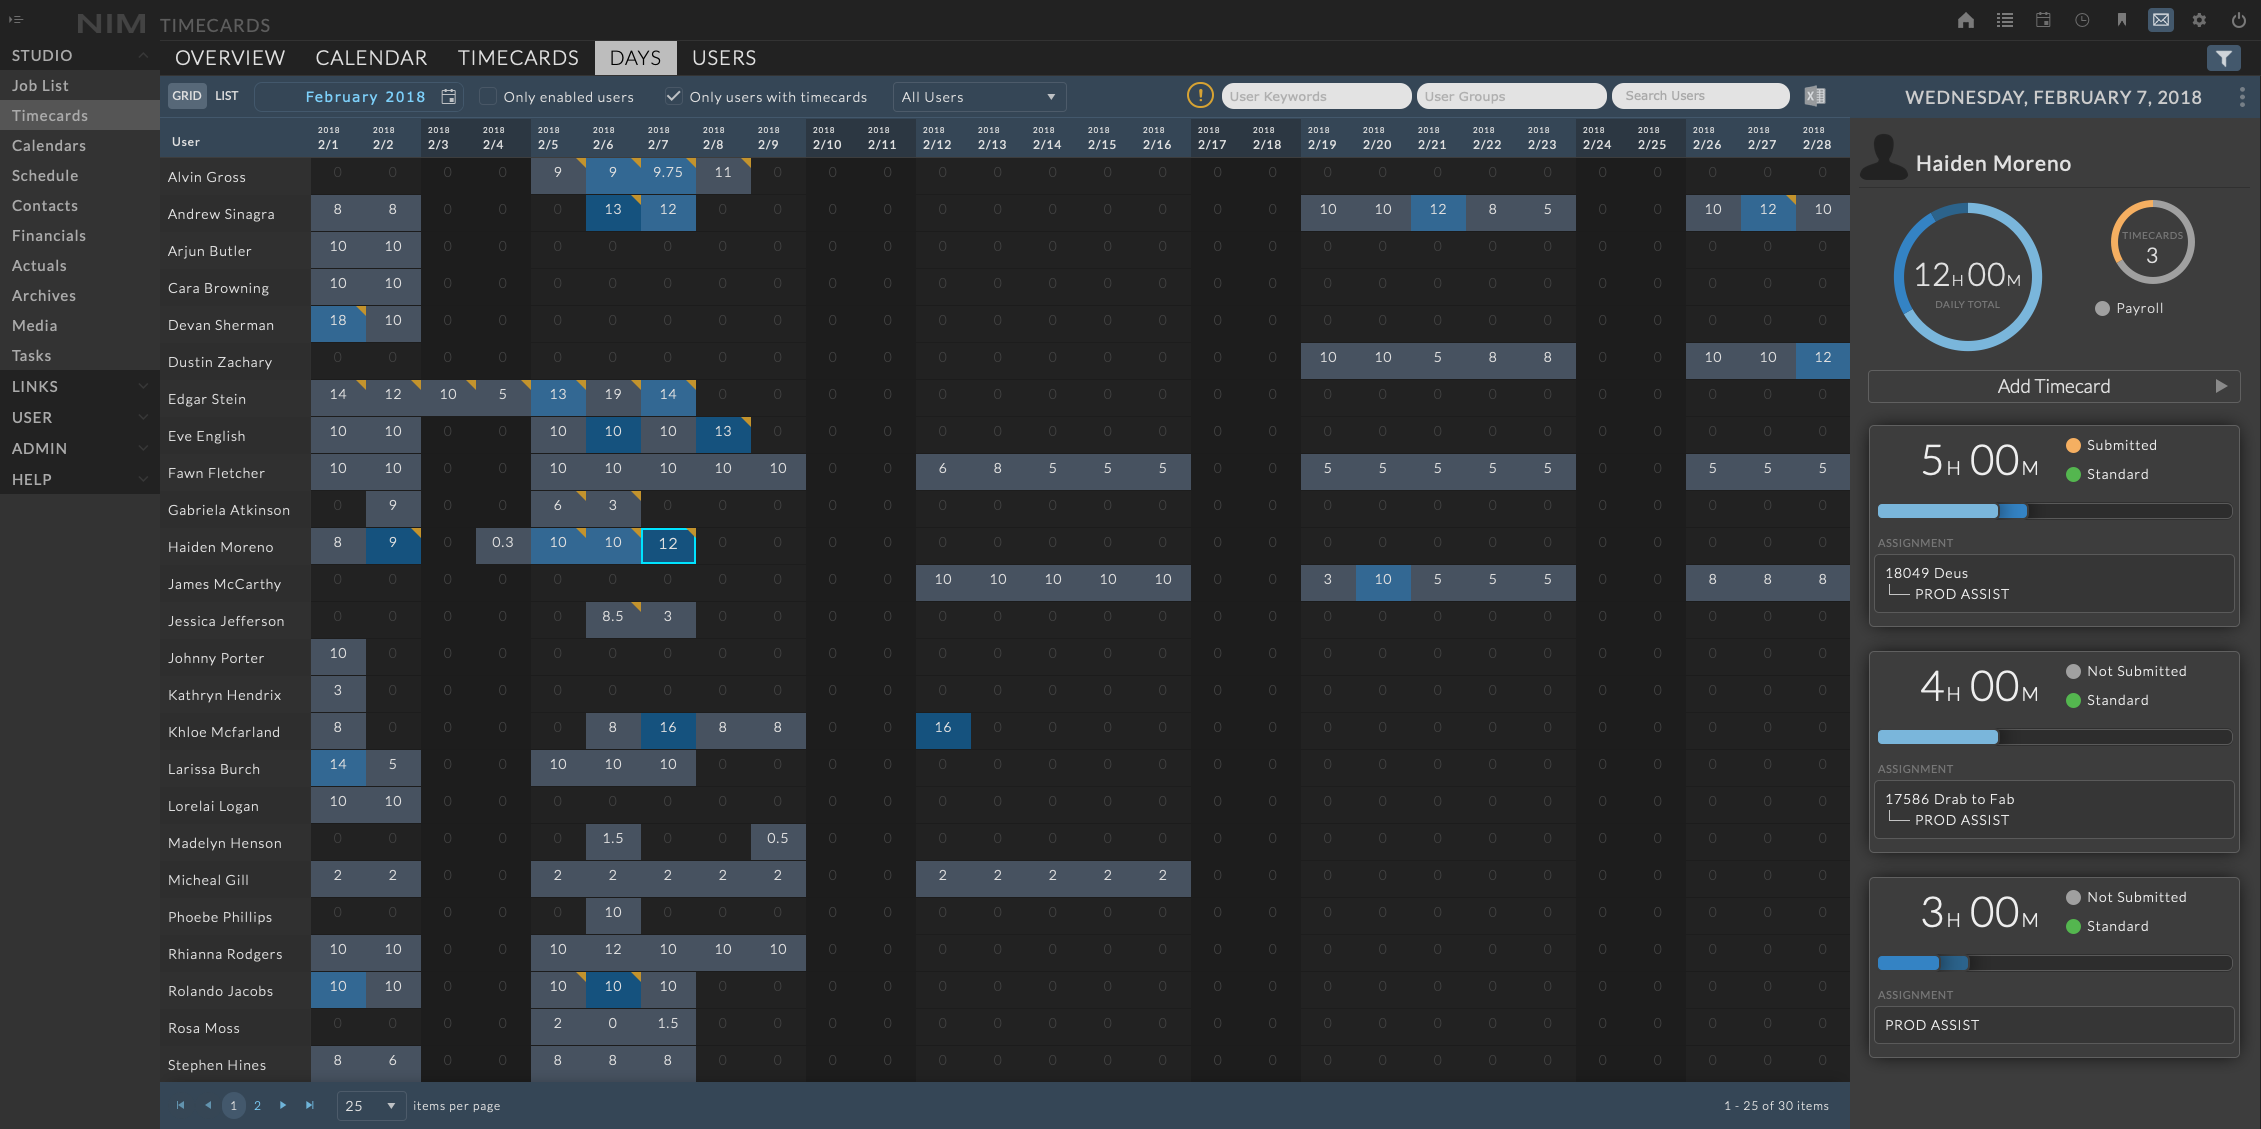 _images/nim5_timecards_production_dayview_grid.png